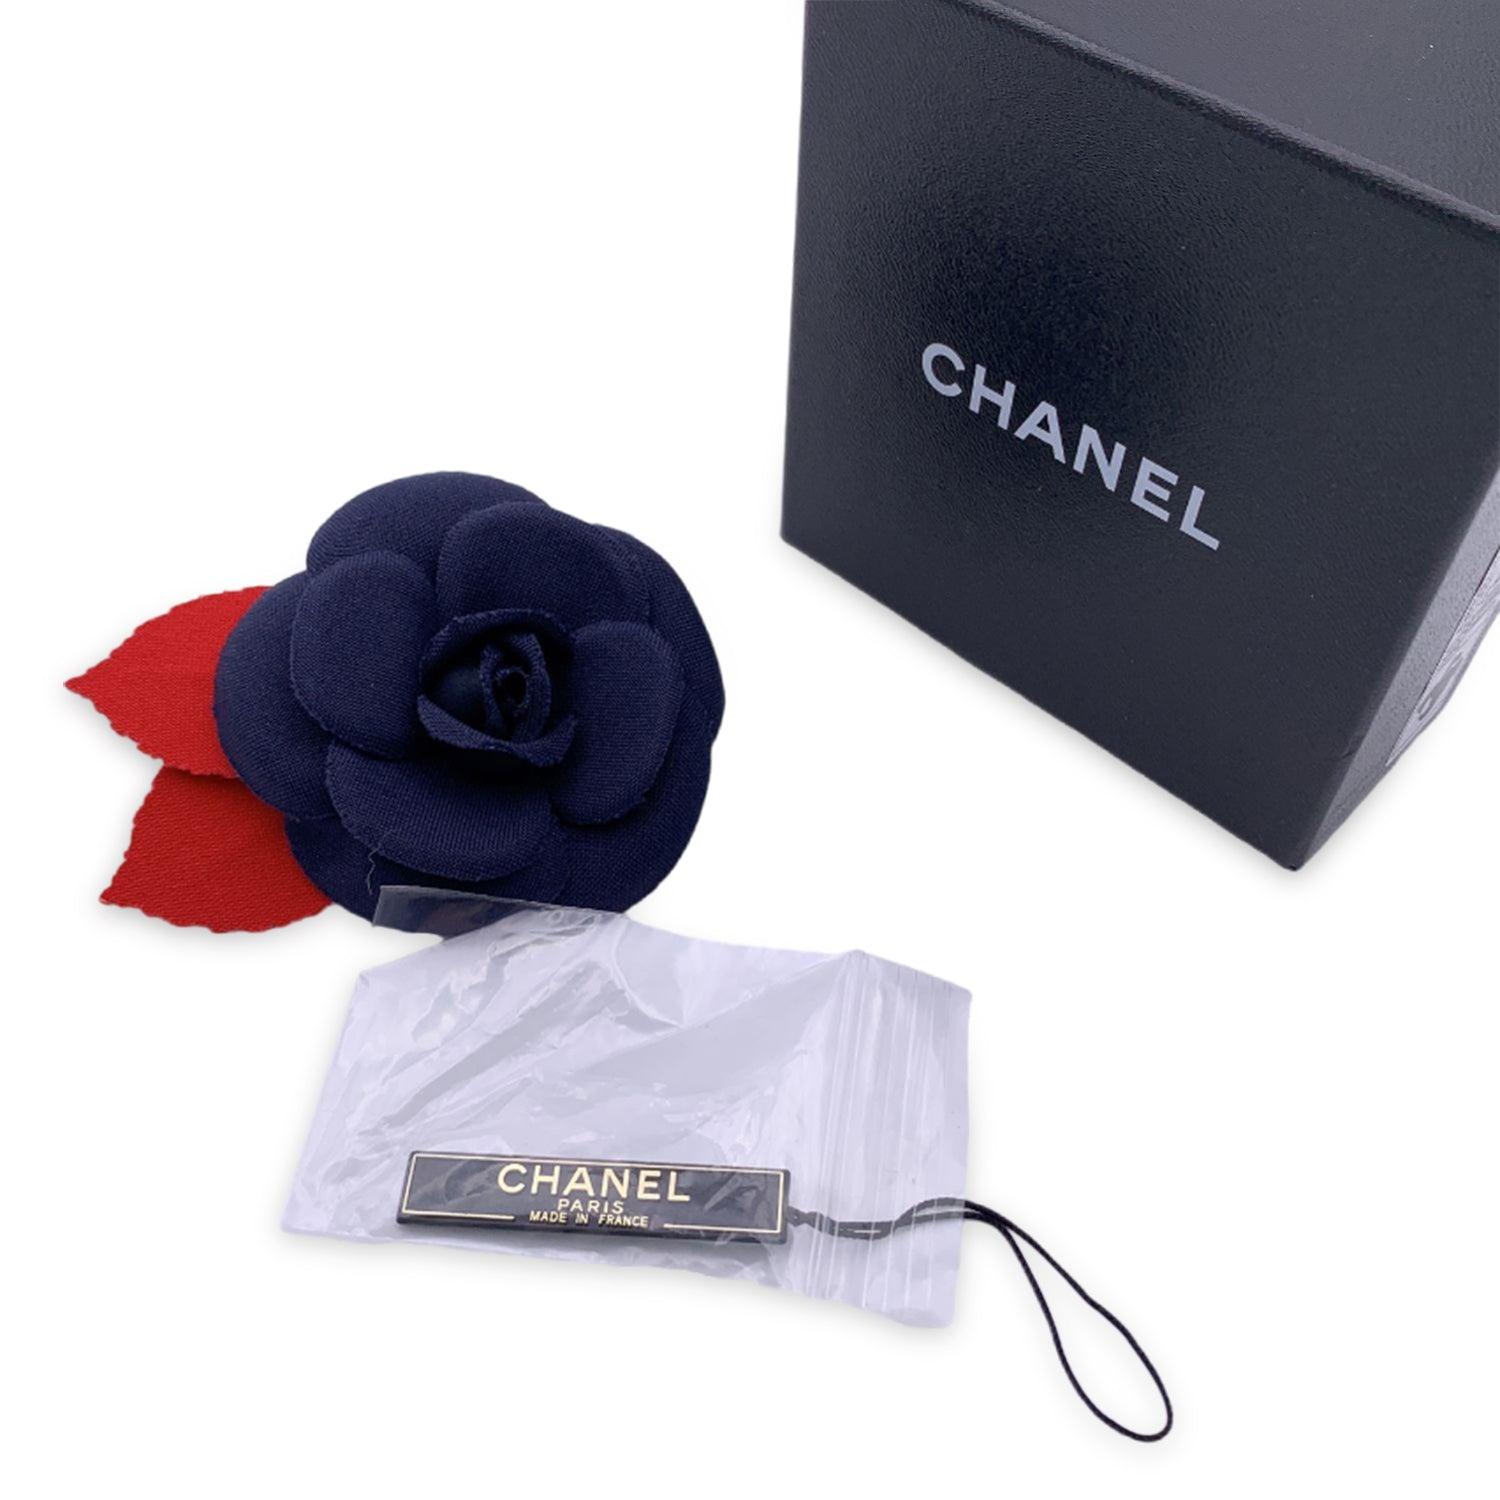 Chanel Vintage Camelia Camellia Flower Pin Brooch. Blue camellia petals with red leaves. Safety pin closure. Diameter: 3 inches - 7.6 cm. 'CHANEL - CC - Made in France' oval tab on the back Condition A - EXCELLENT Gently used. Please check the